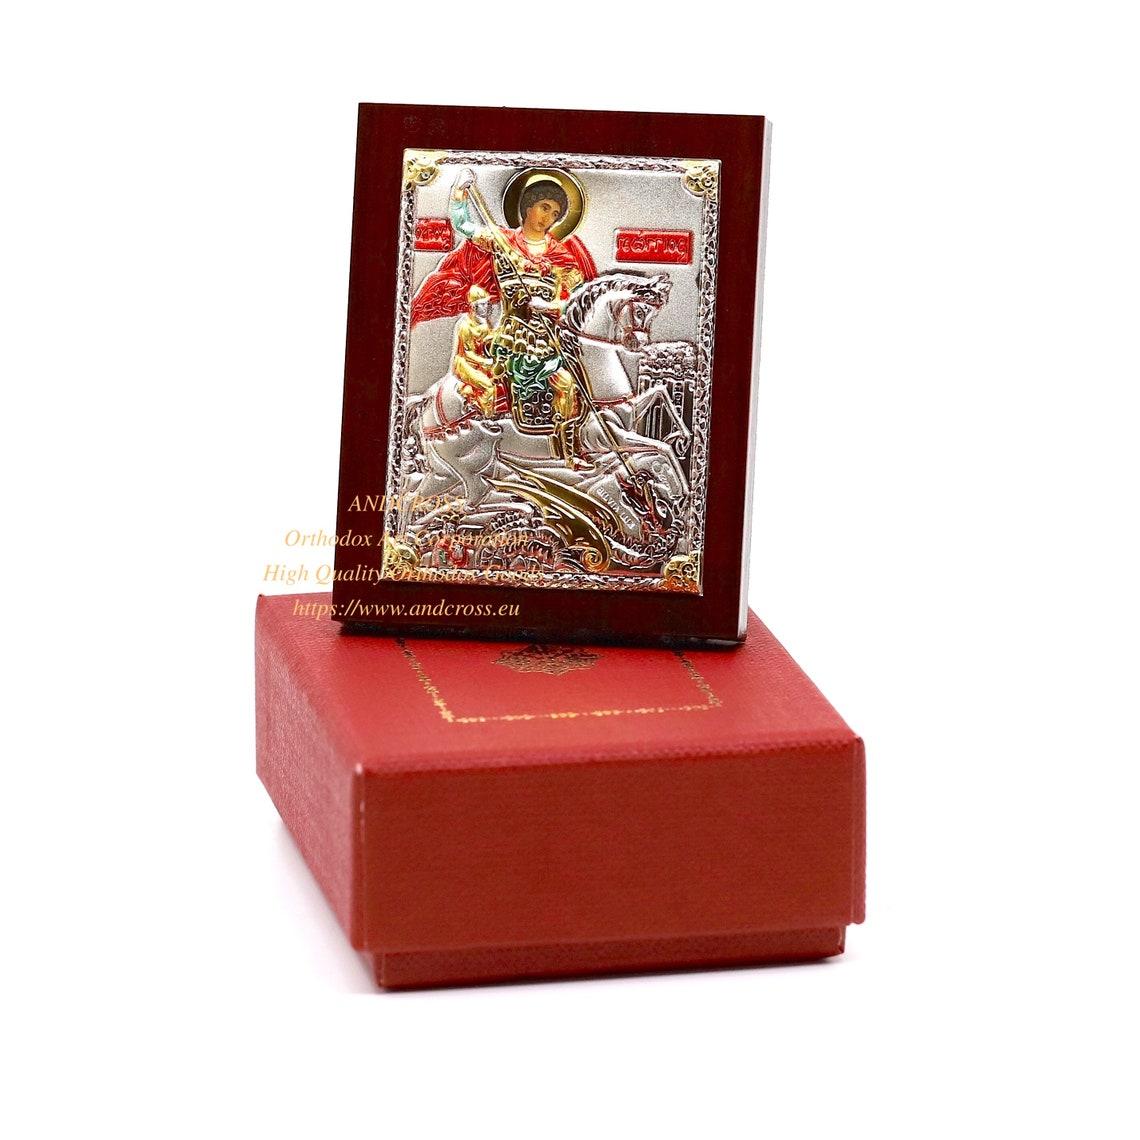 Small Russian Orthodox Icon St George Warrior The Victory Bearer . Silver Plated .999 ( 6cm X 4cm ). B117|Small Russian Orthodox Icon St George Warrior The Victory Bearer . Silver Plated .999 ( 6cm X 4cm ). B117|Small Russian Orthodox Icon St George Warrior The Victory Bearer . Silver Plated .999 ( 6cm X 4cm ). B117|Small Russian Orthodox Icon St George Warrior The Victory Bearer . Silver Plated .999 ( 6cm X 4cm ). B117